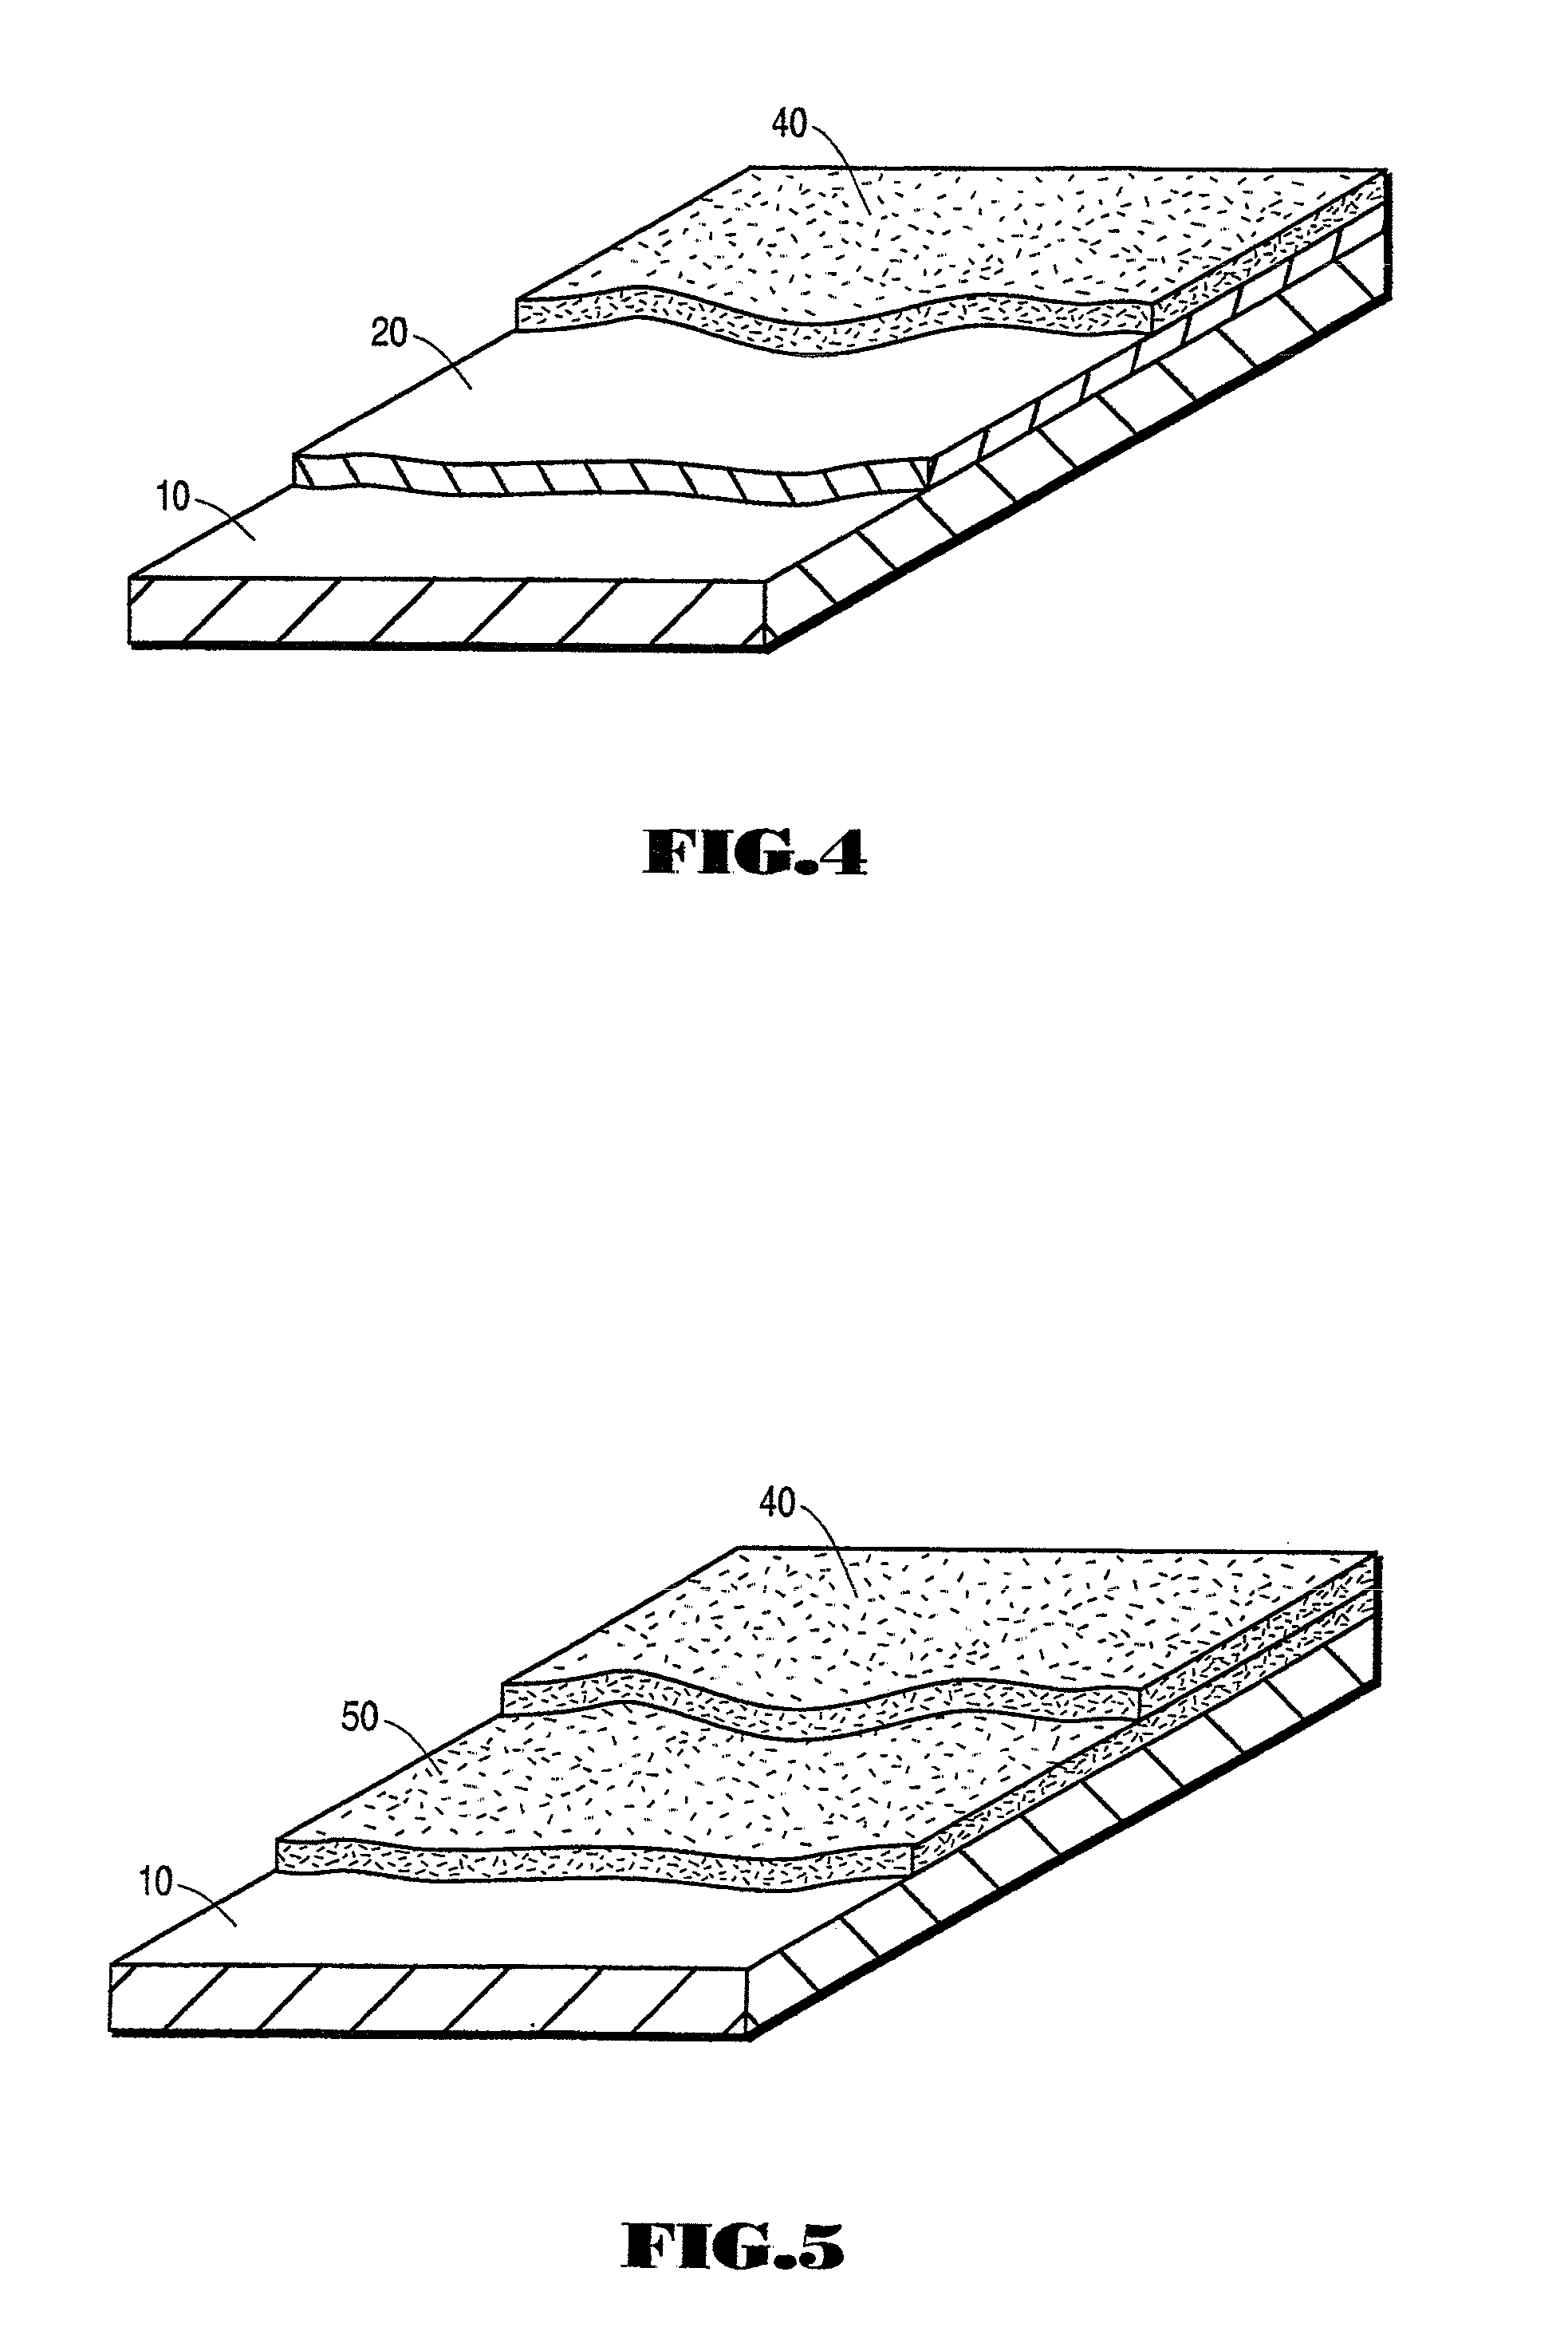 Cementitious Veneer and Laminate Material Incorporating Reinforcing Fibers